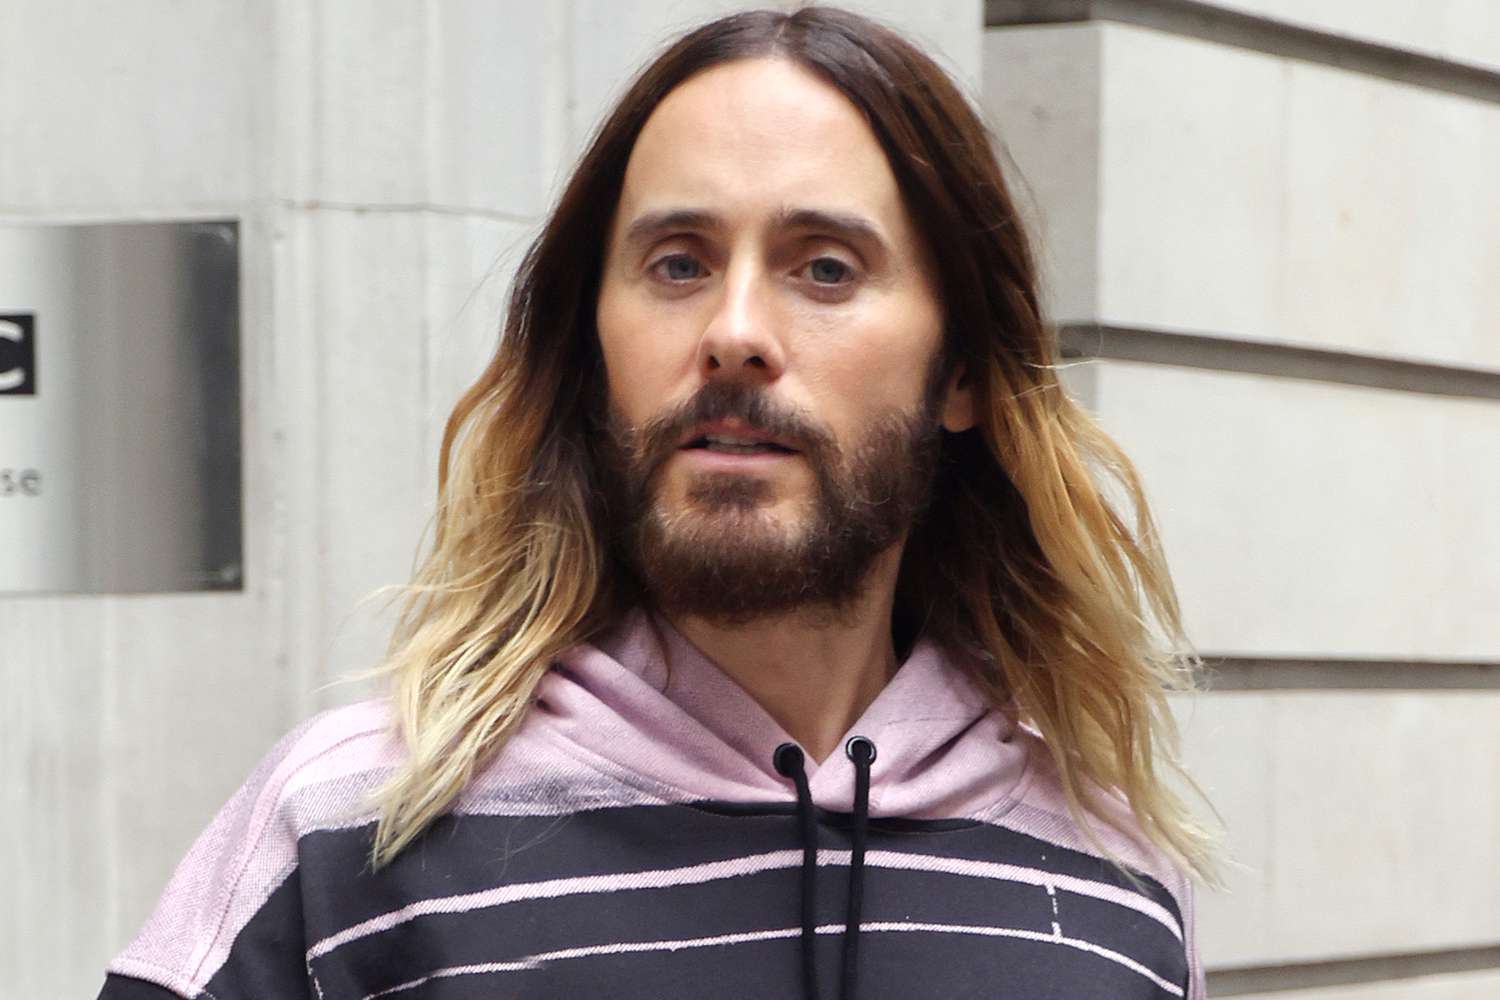 LONDON, ENGLAND - MAY 30: Jared Leto leaving an interview at BBC Radio 2 on May 30, 2023 in London, England. (Photo by Neil Mockford/GC Images)